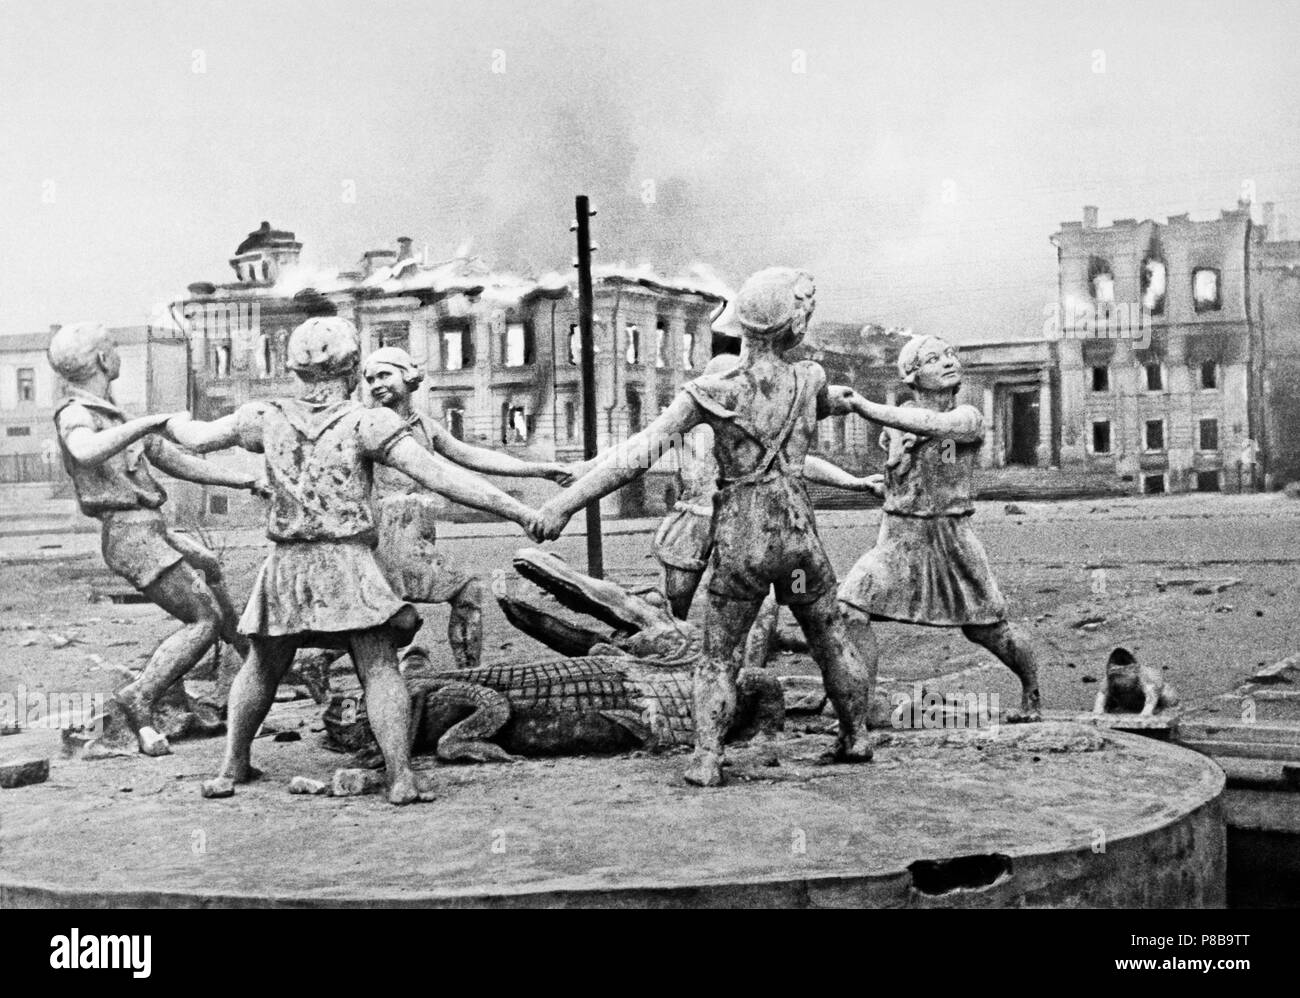 Stalingrad, 23 August 1942. Museum: Moscow Photo Museum (House of Photography). Stock Photo